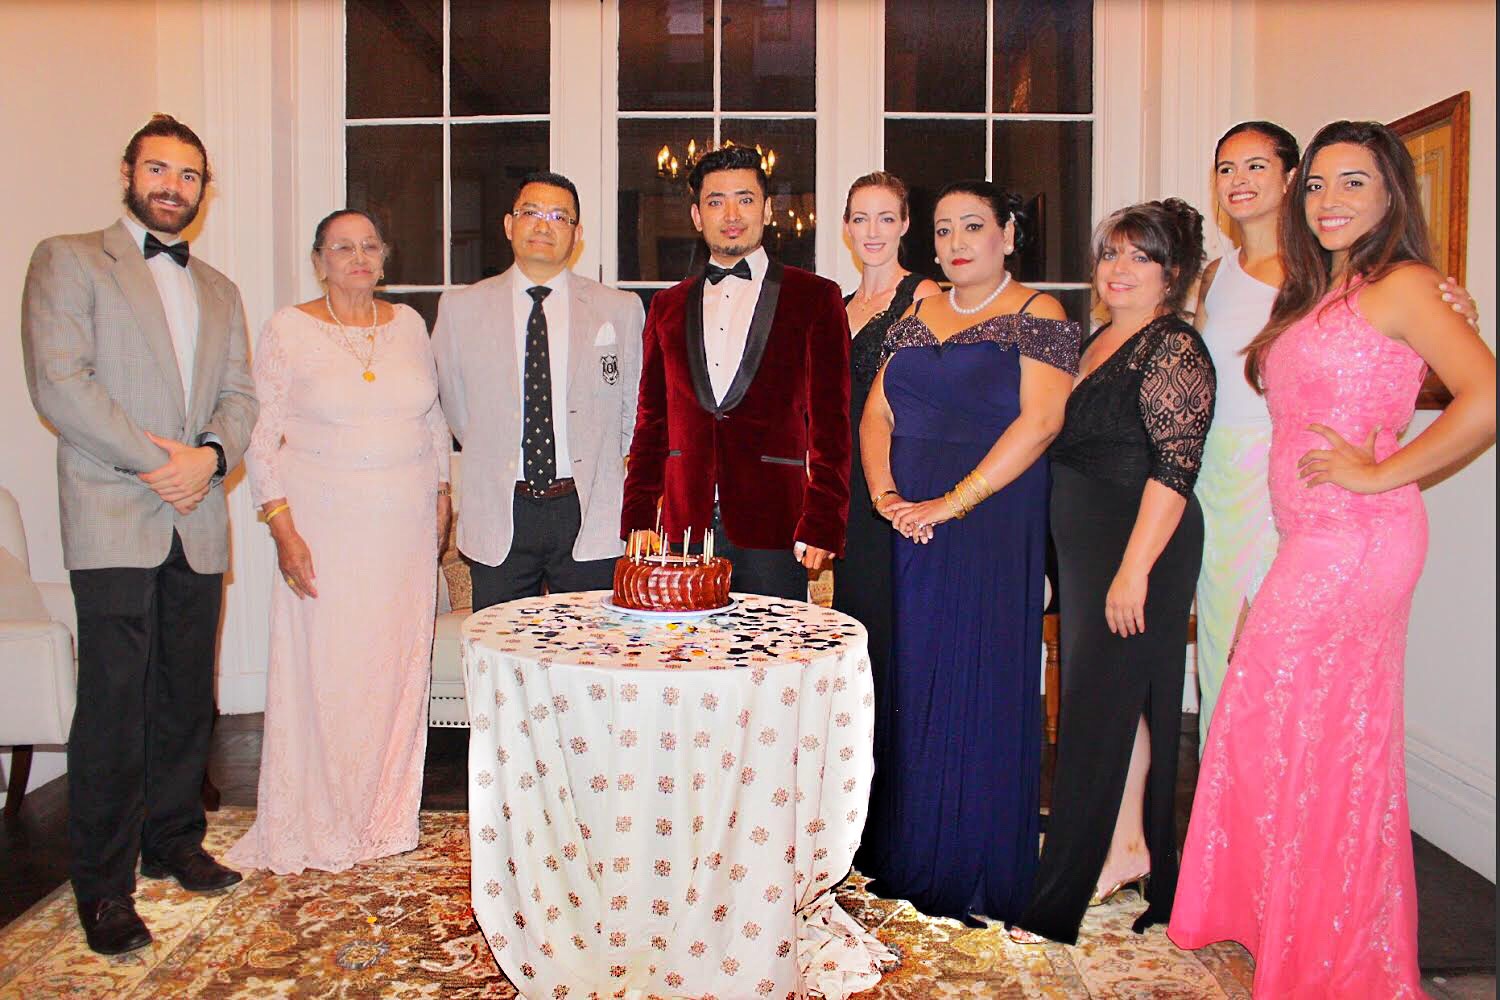 Global Luxury Ambassador Pritan Ambroase and his family at the Annual House of Ambroase Family Event 